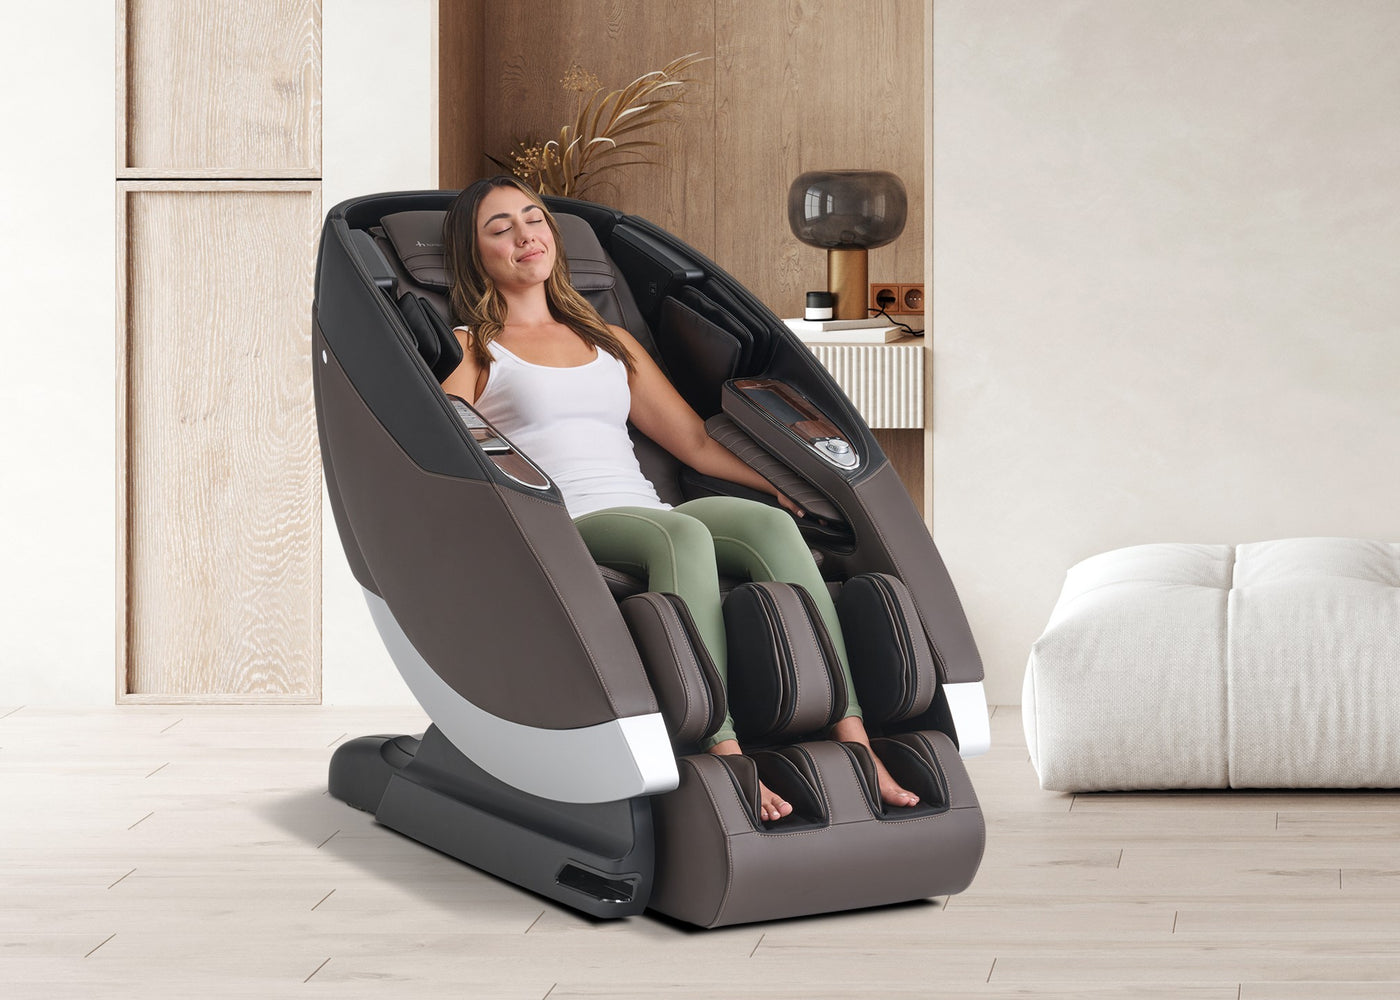 Super Novo 2.0 video banner image of woman in the massage chair in a living room setting.